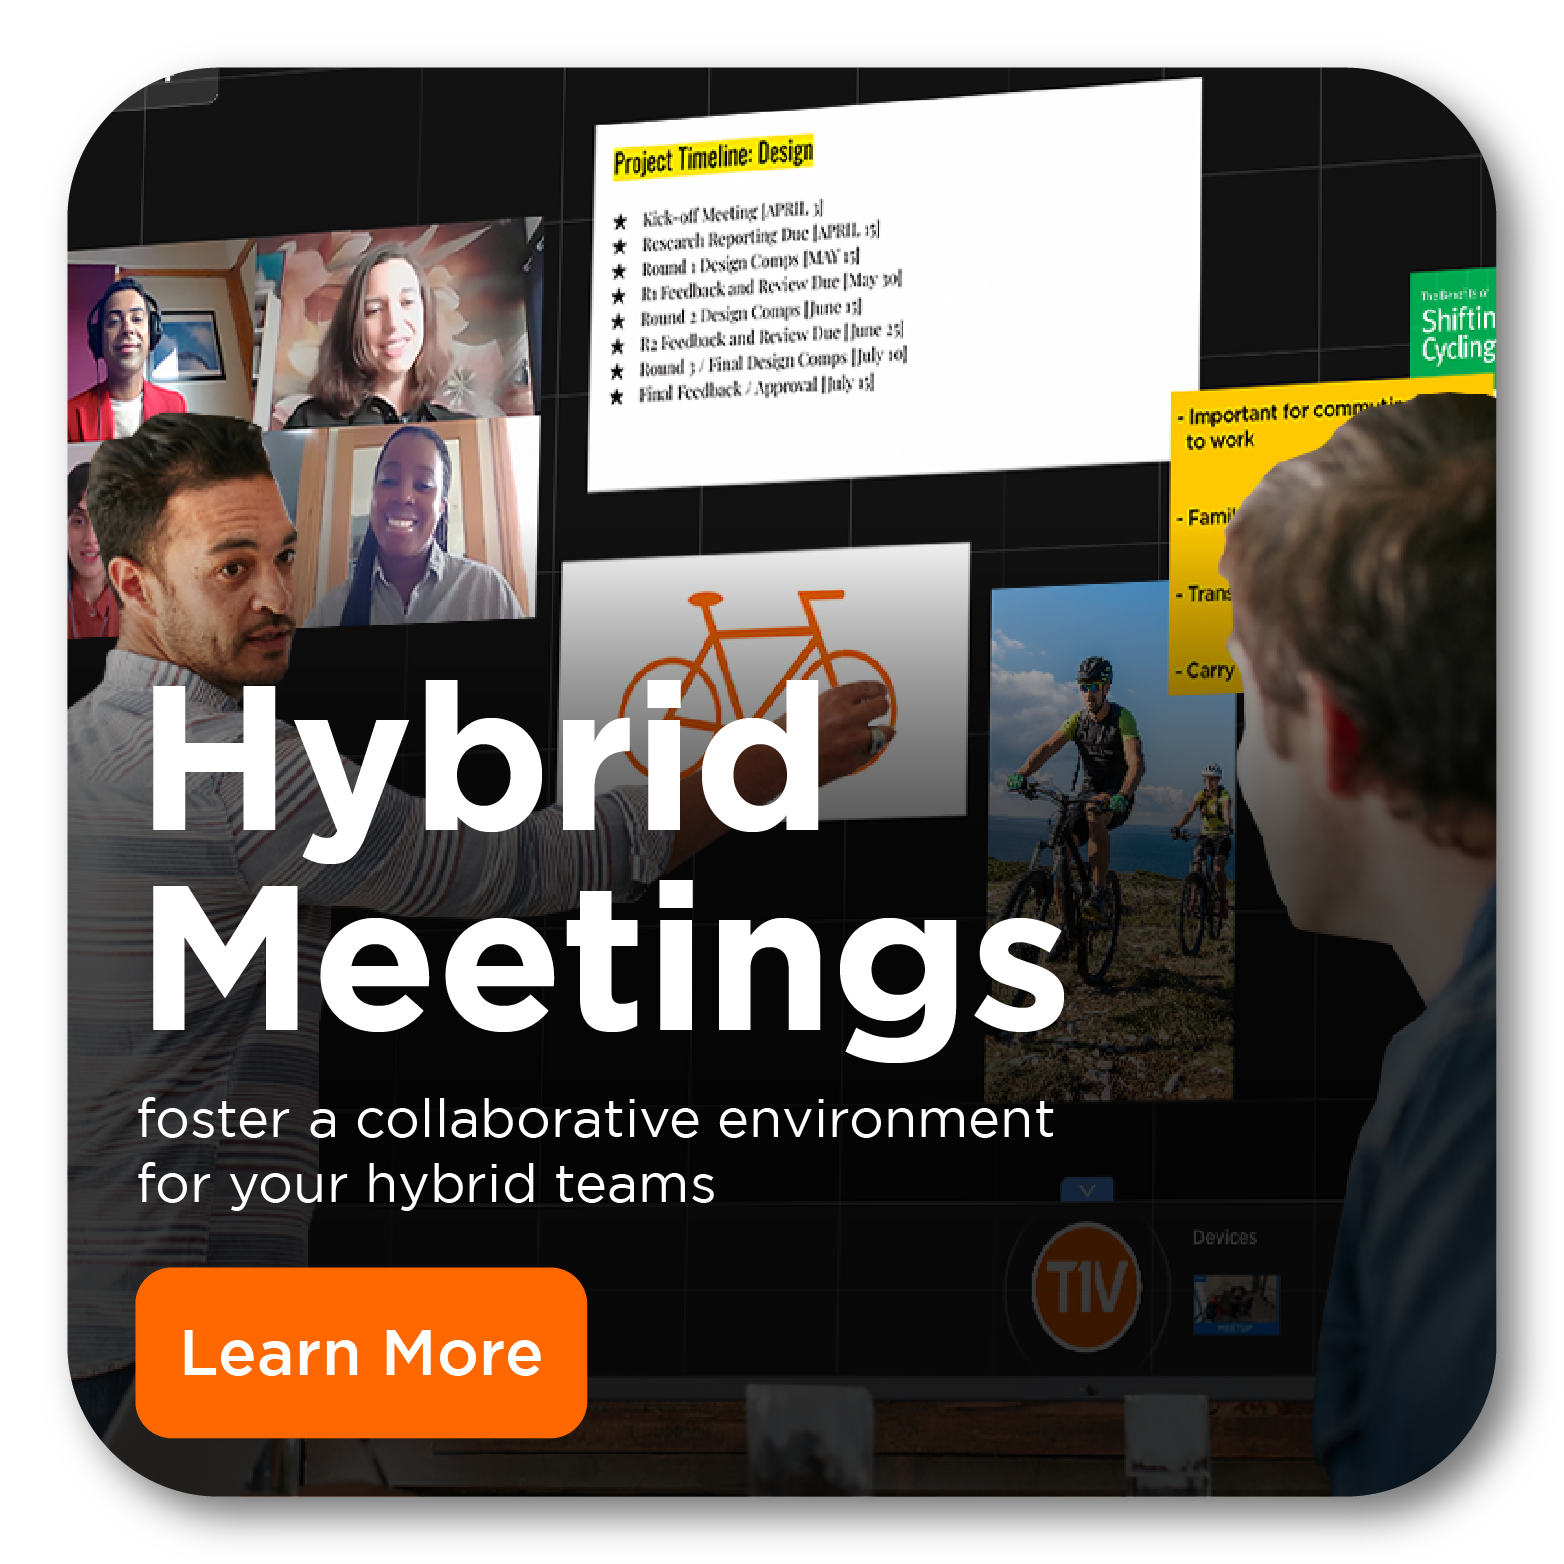 T1V-Hybrid-Meetings-Spaces-Page-Button-1